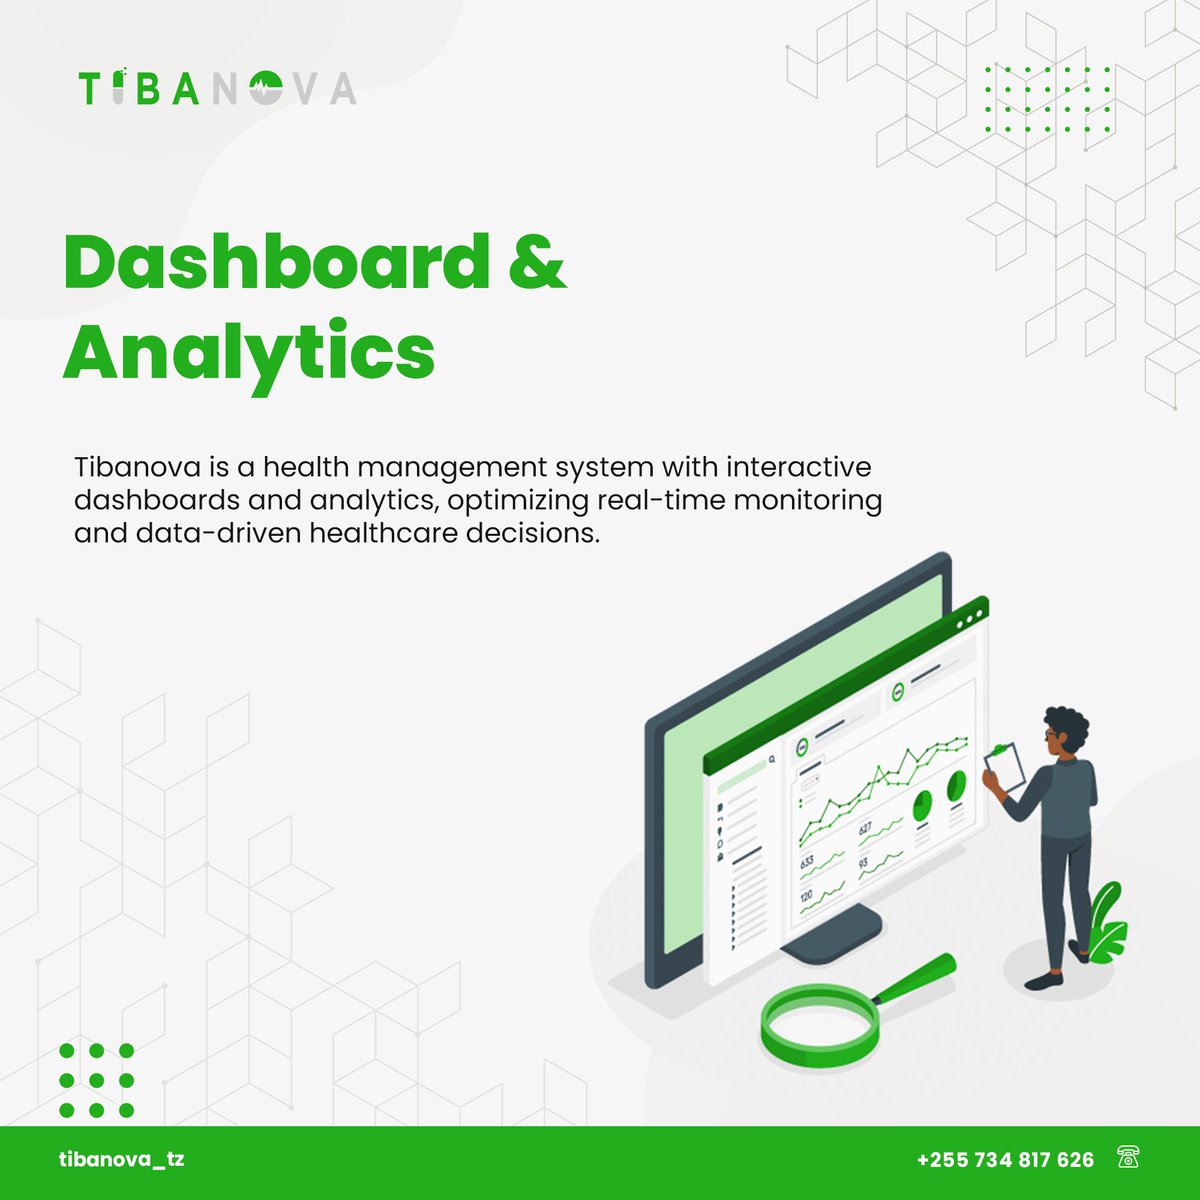 Tibanova is a health management system with interactive dashboards and analytics, optimizing real-time monitoring and data-driven healthcare decisions.
#healthcare #healthcareanalytics #medical #medicalclinic #healthclinic #tibanova #truebitstech #medicalknowledge #medicalskills